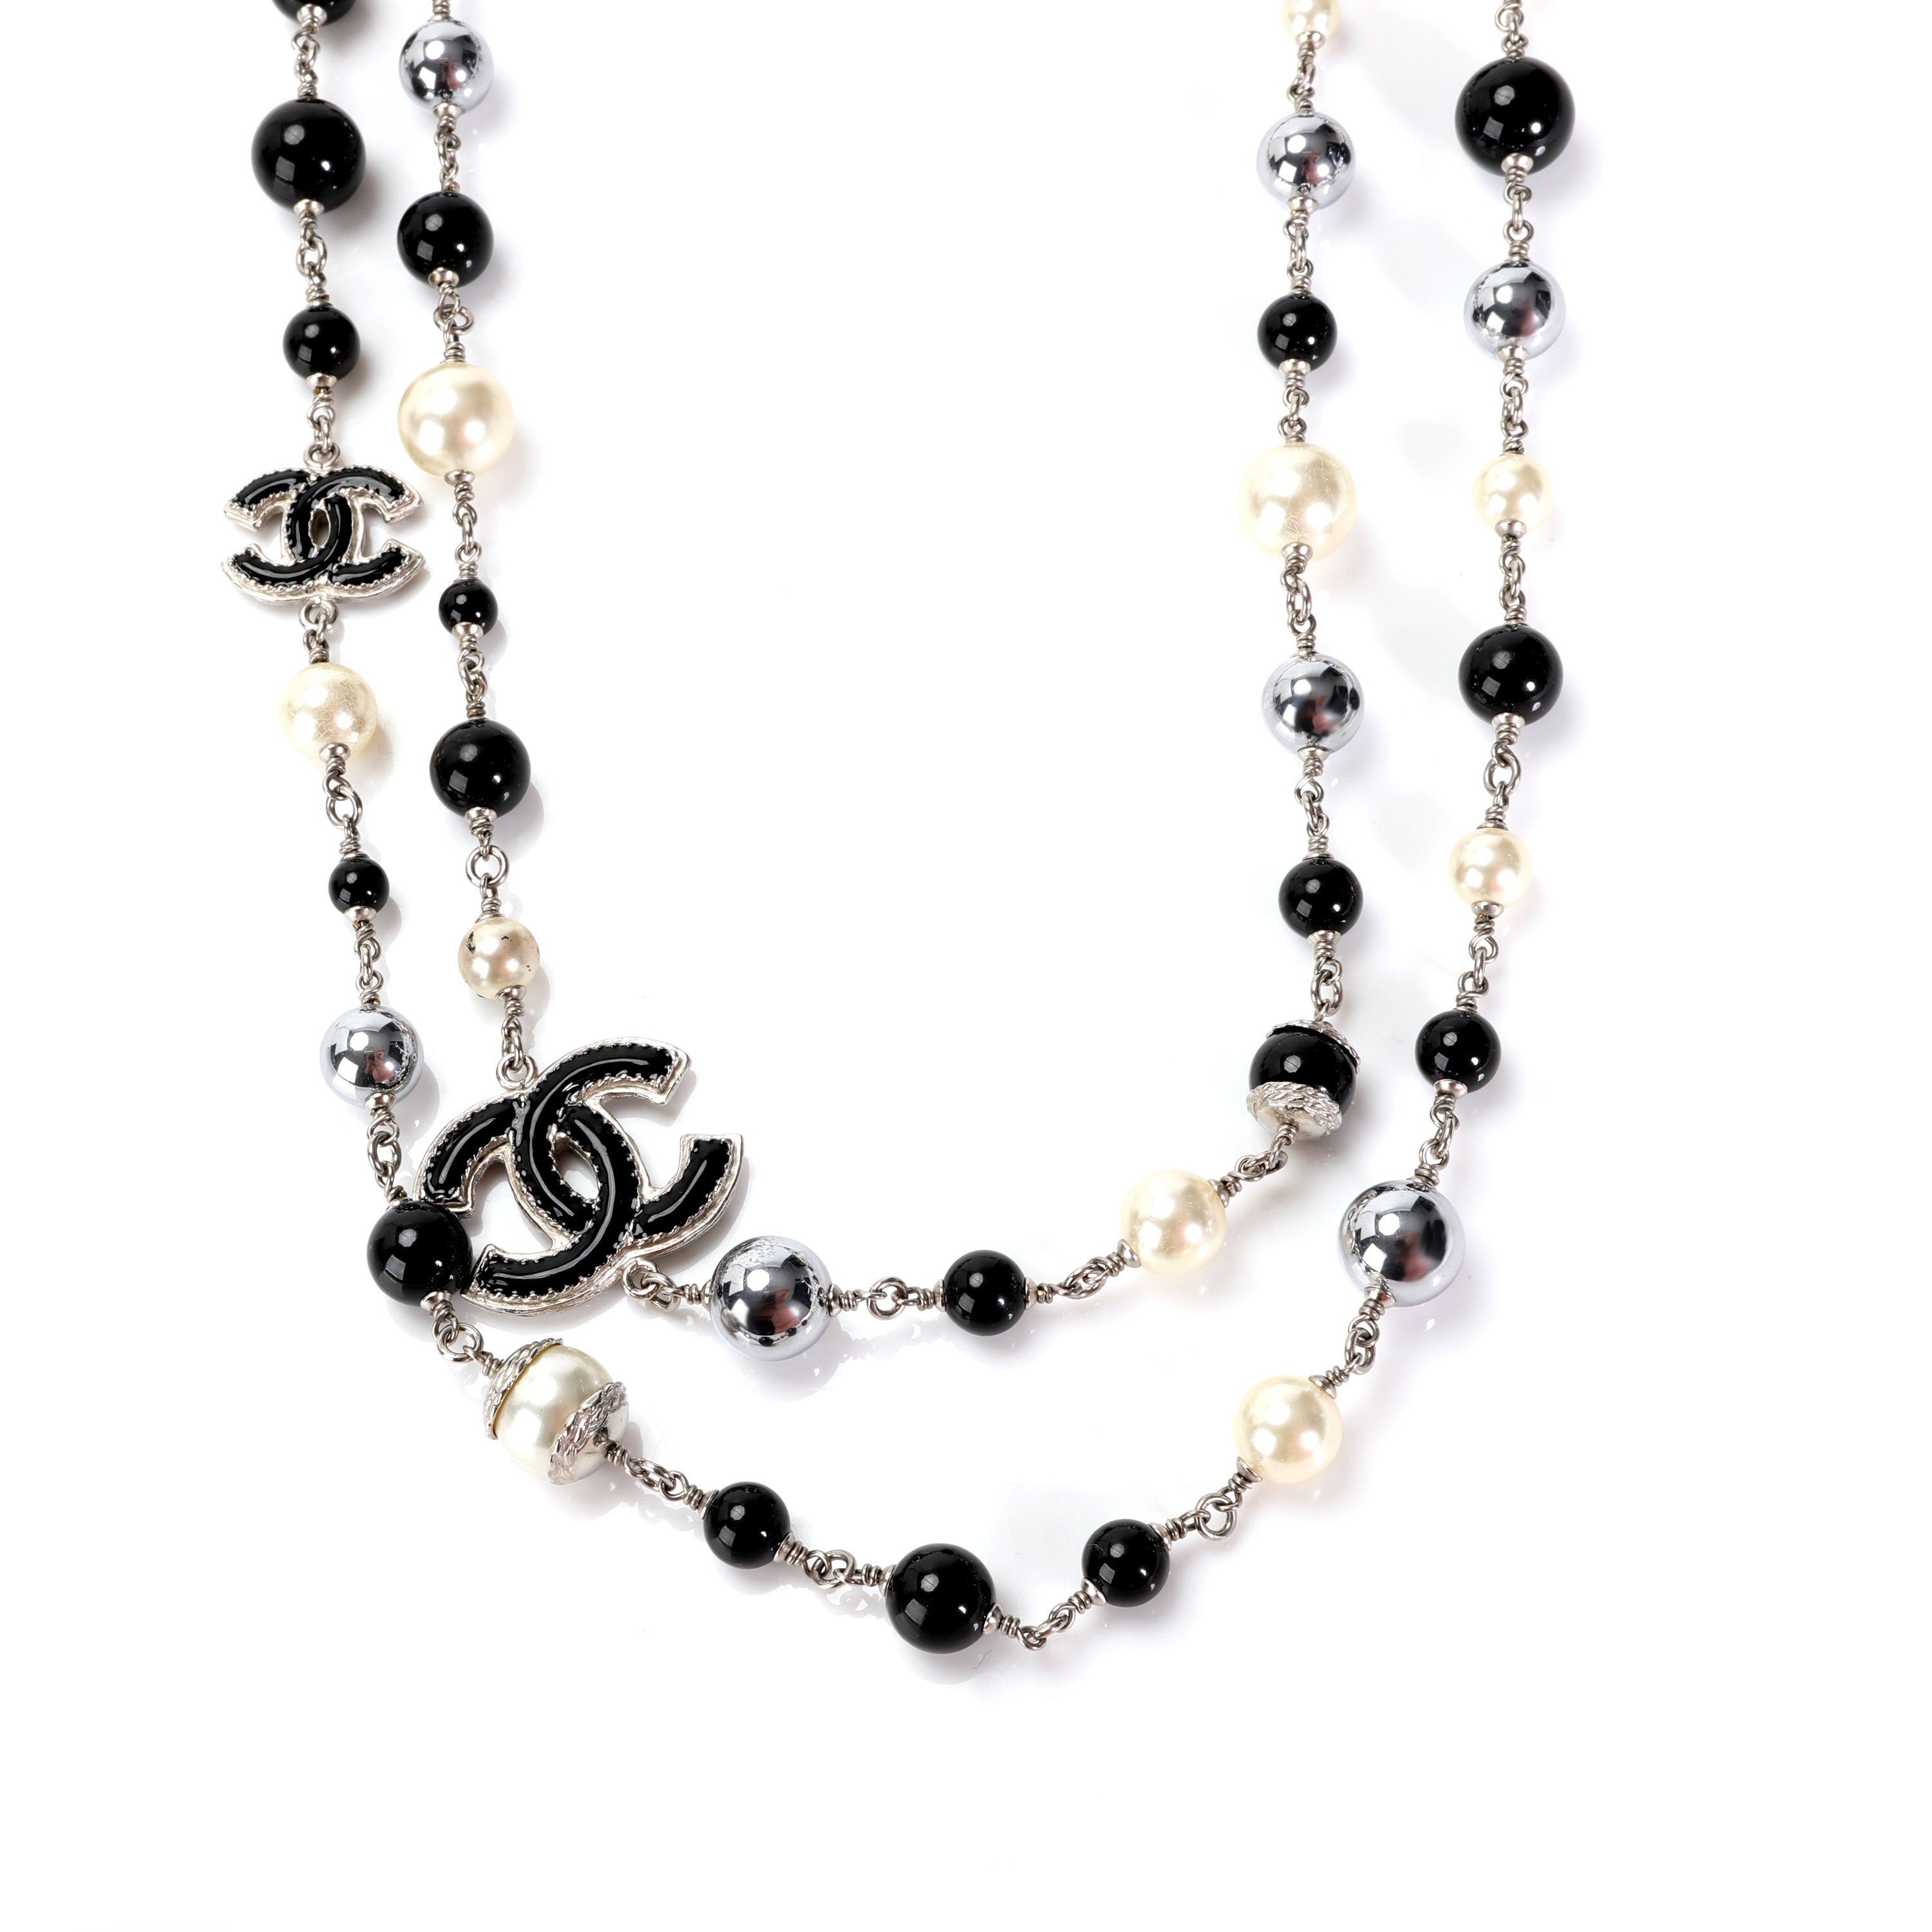 Chanel WhiteBlack Beaded and CC Logo Long Necklace  Jewelry  CHN130516B   Chanel pearls Chanel jewelry Chanel pearl necklace